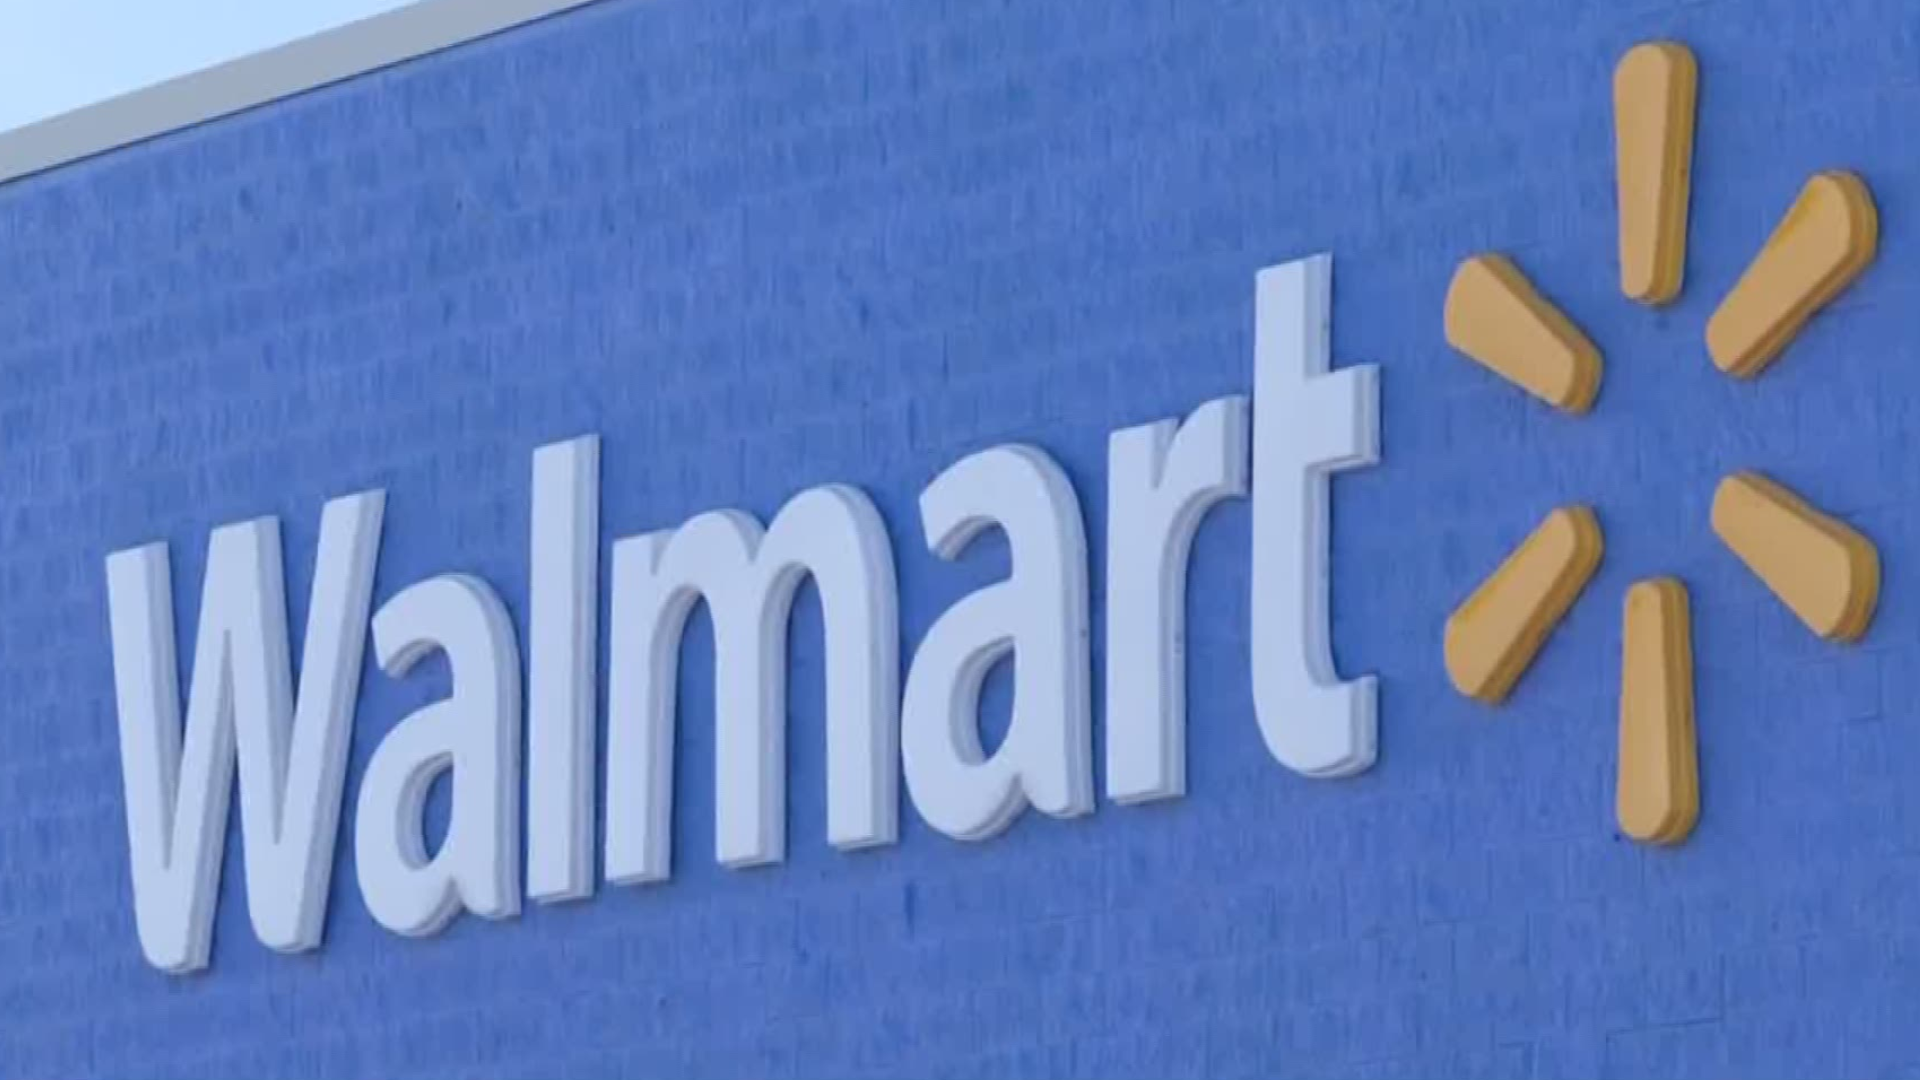 Walmart stores across the country will be adjusting their hours of operations in order to restock and sanitize stores.